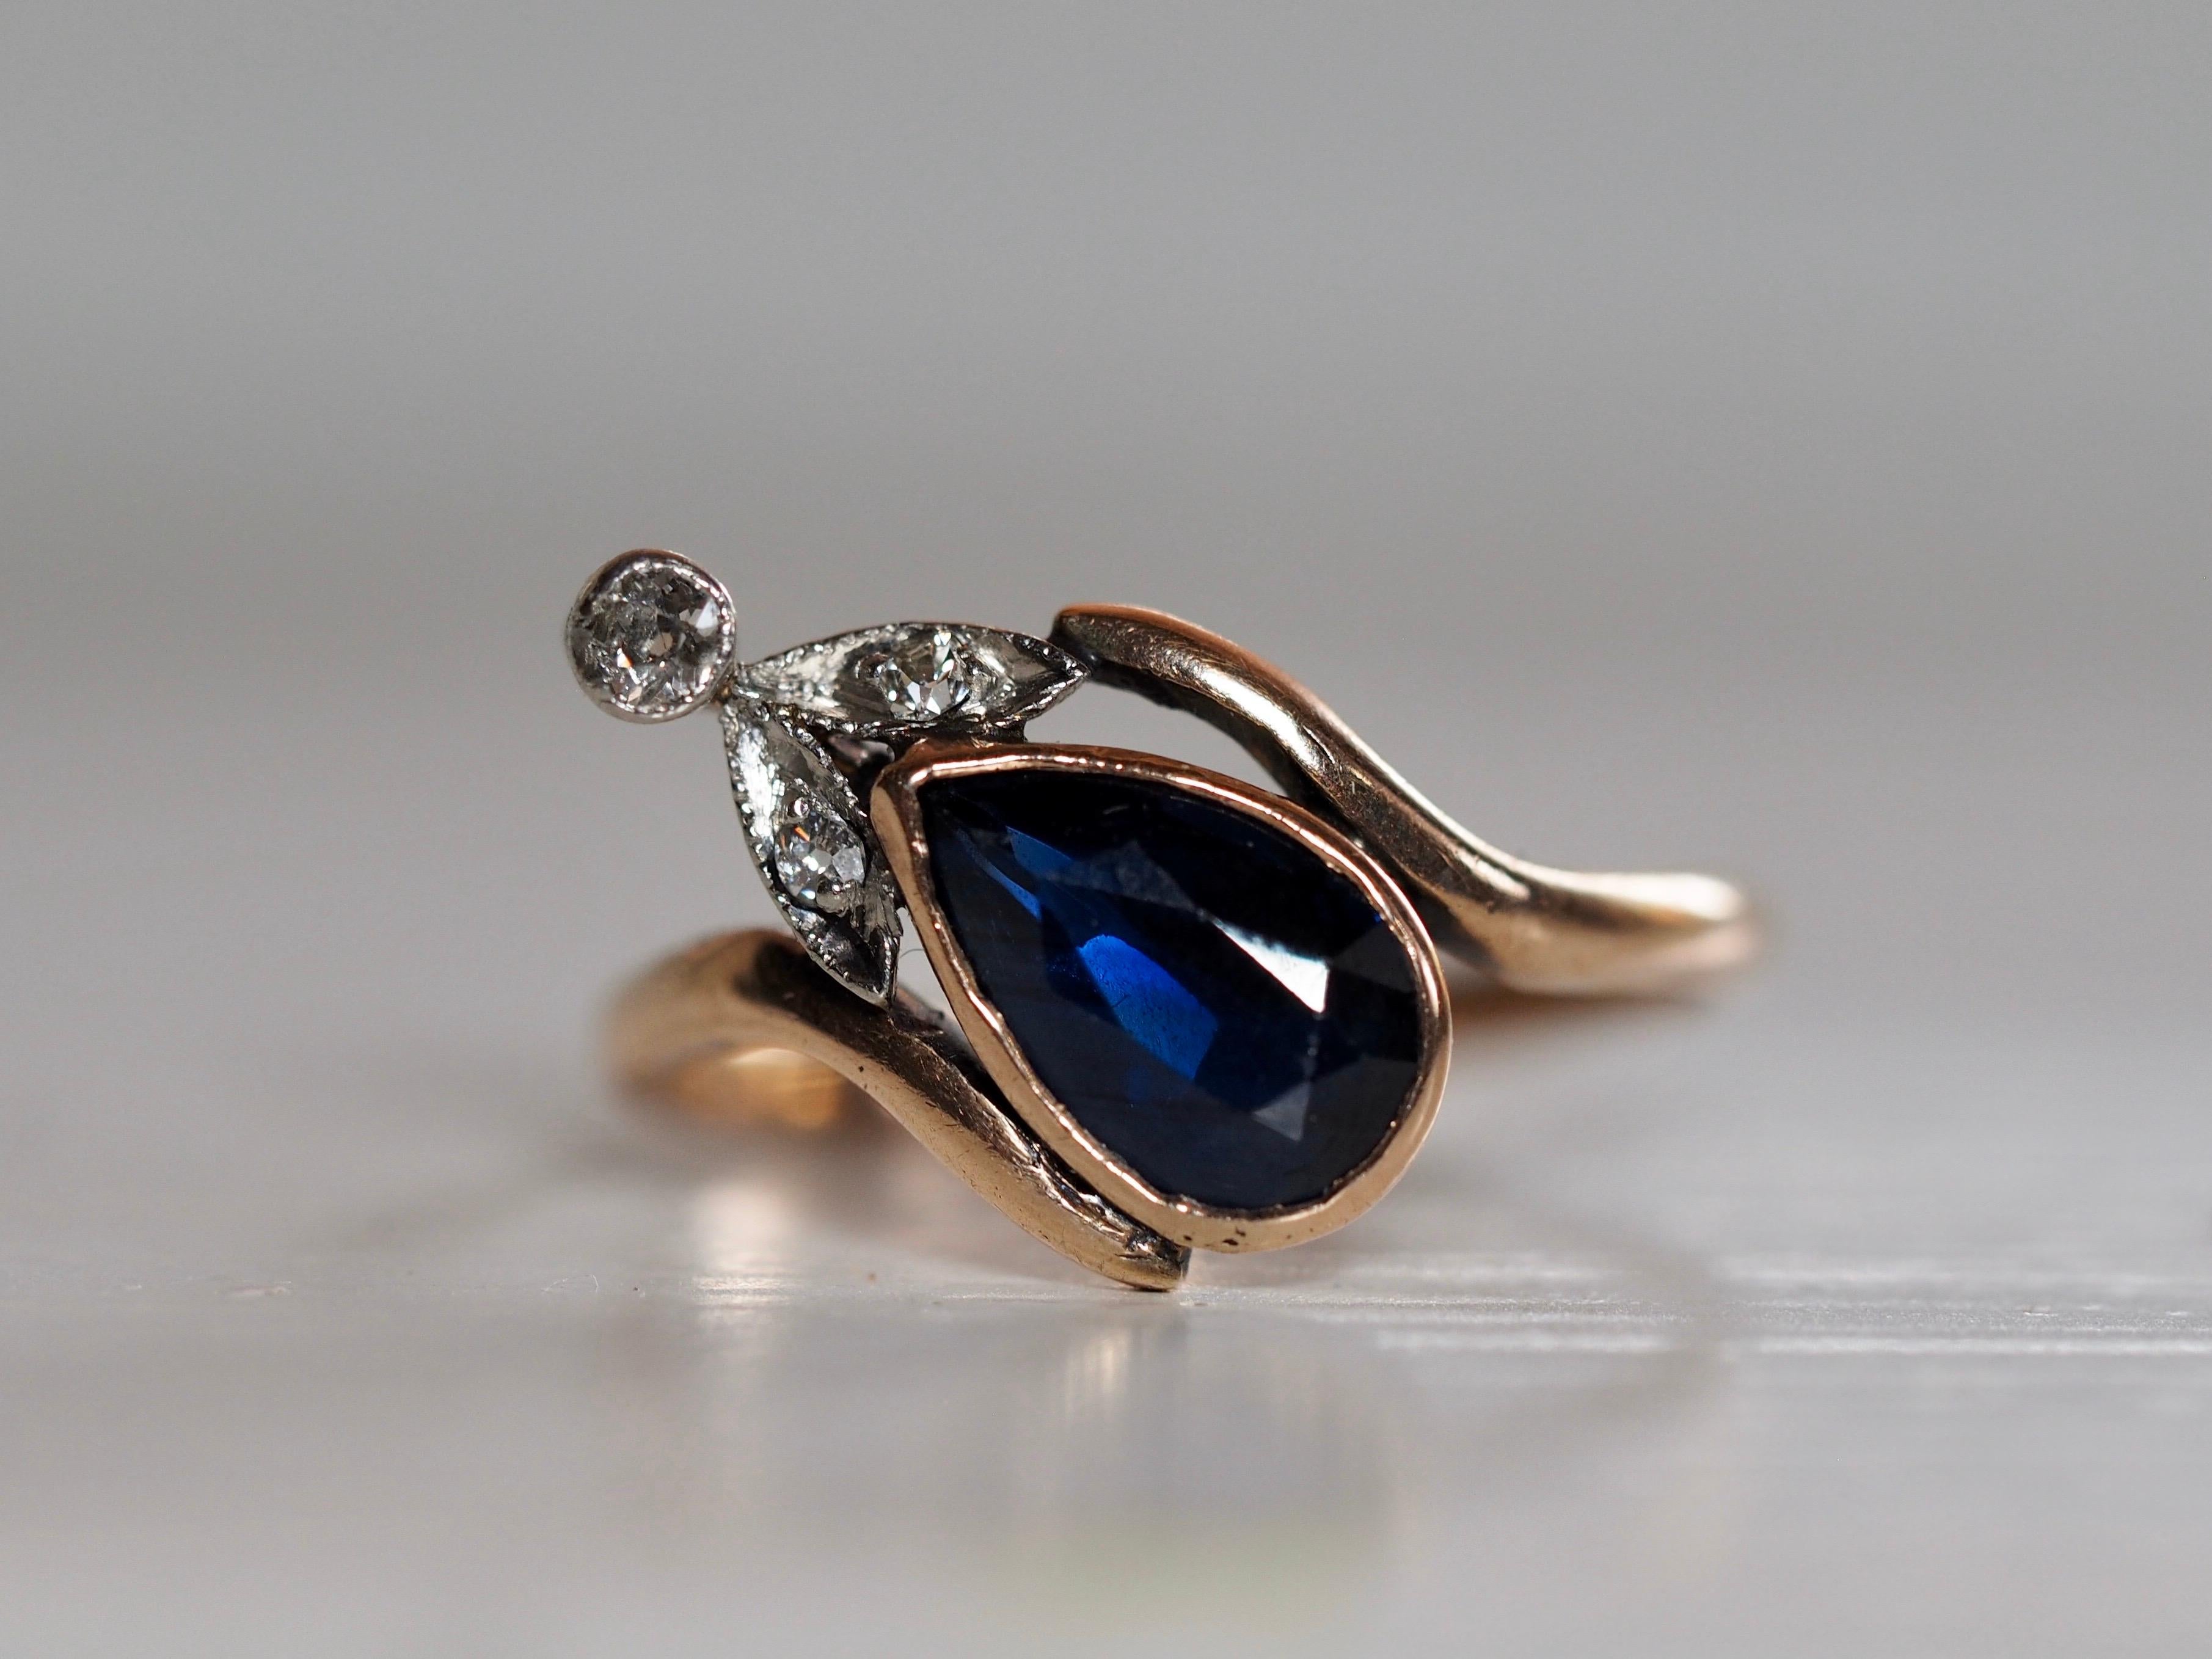 This elegant Art Deco ring holds a stunning 1.58 carat blue sapphire pear shaped center, bezel set in 14- karat yellow gold. The center is accented with a delicate touch of three old minor and old European cut diamonds set above the sapphire in a